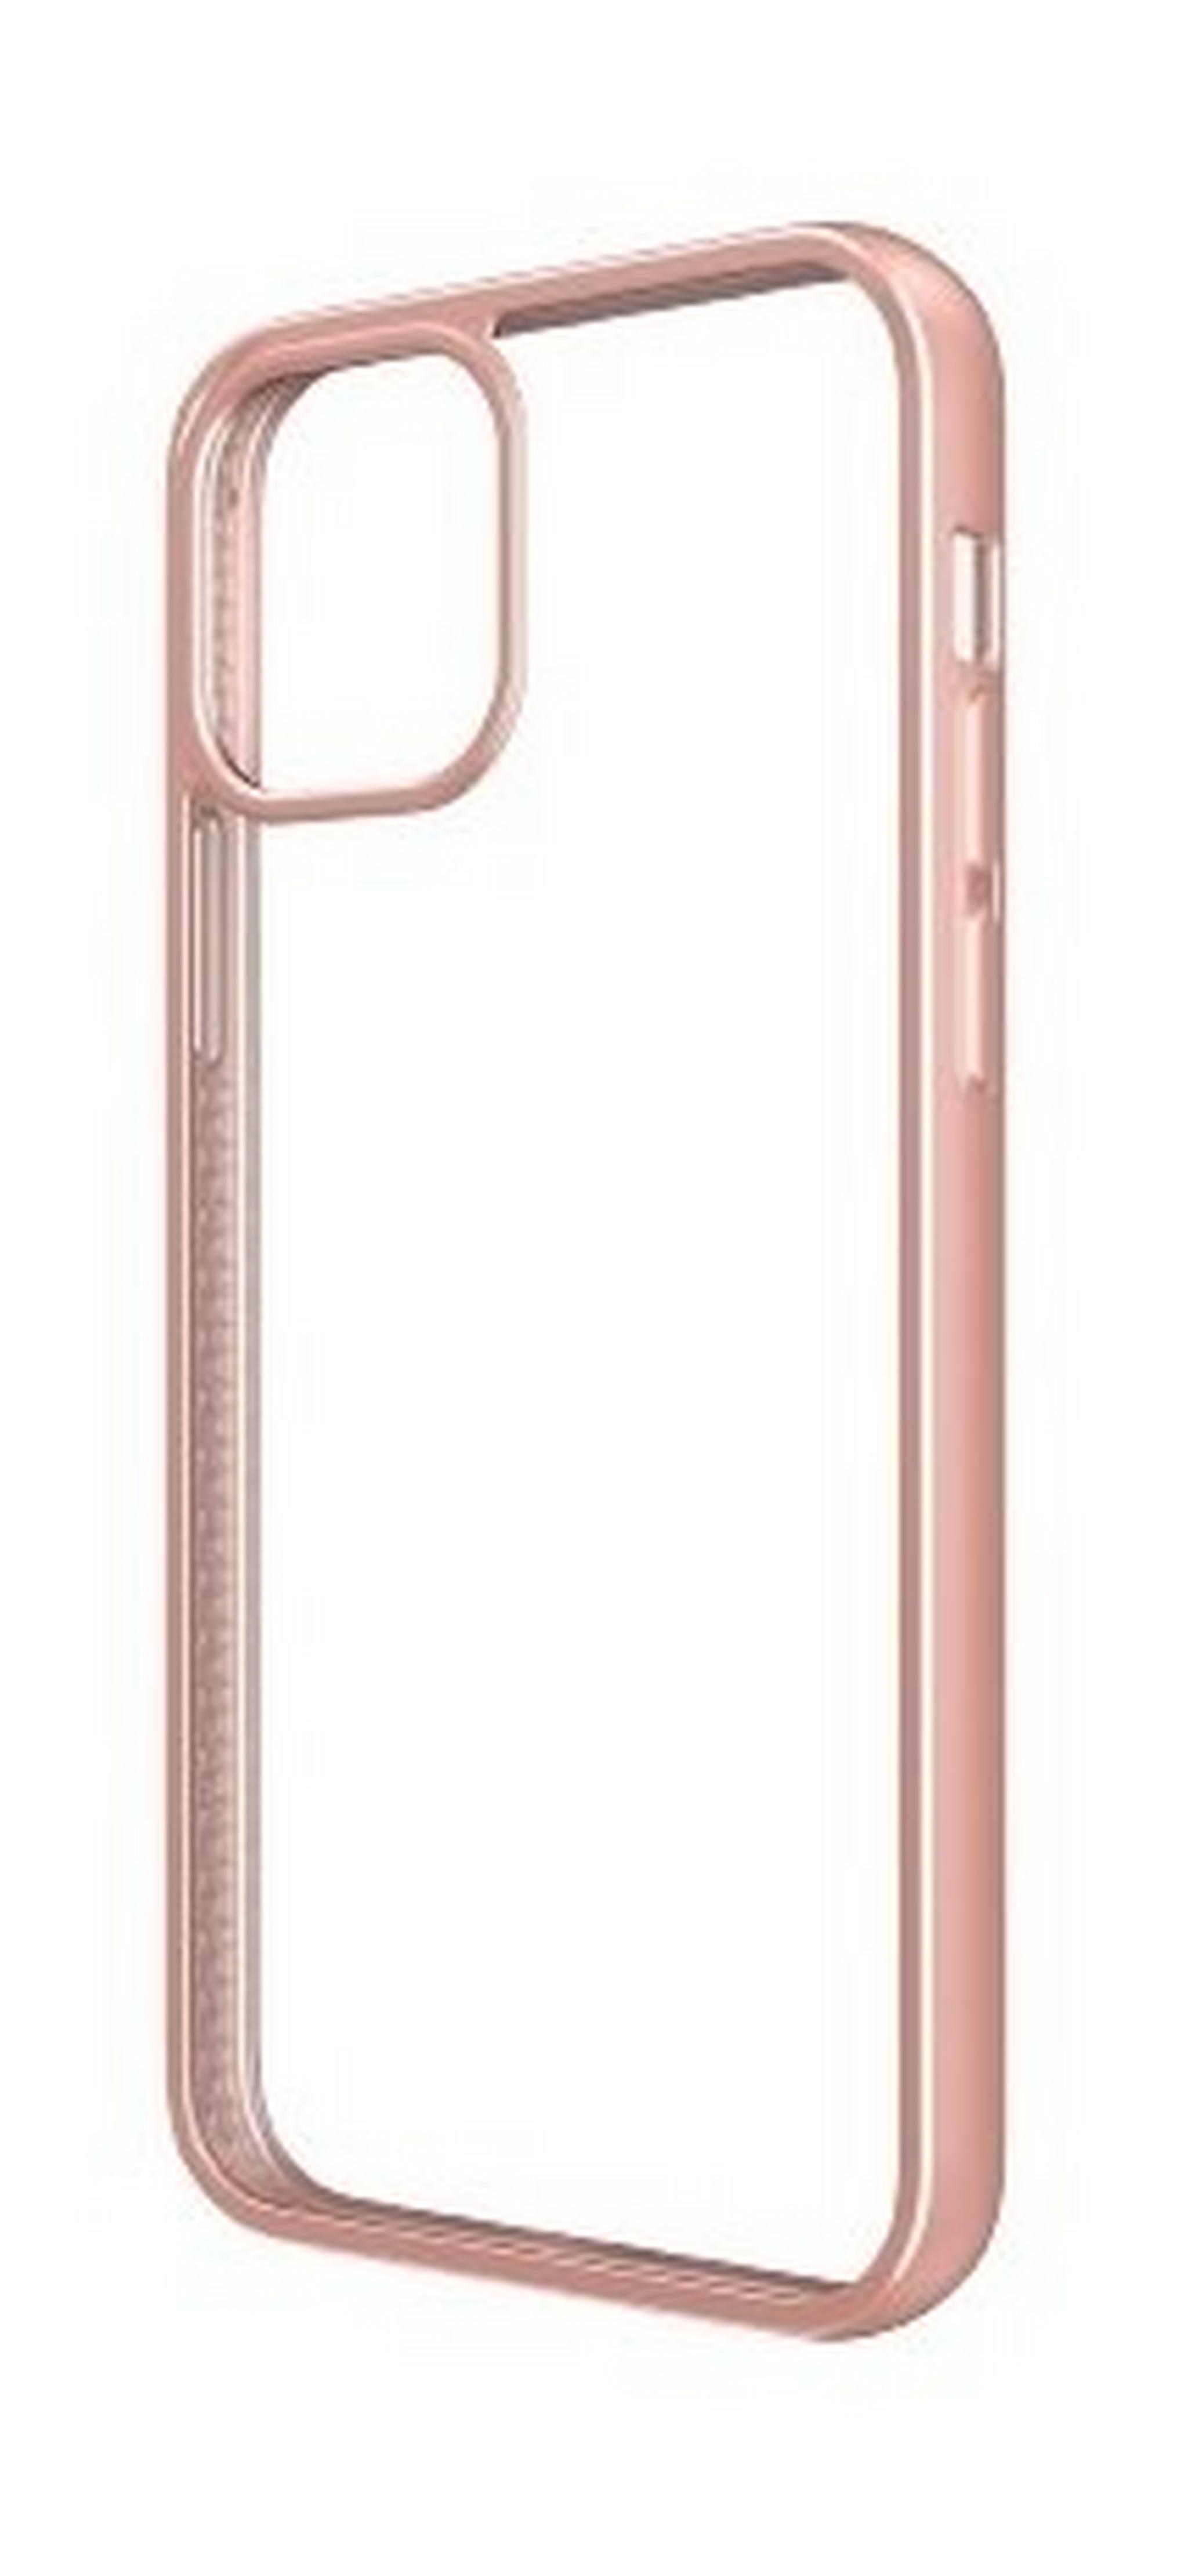 Panzer iPhone 12 Pro Max Anti-Bacterial Case - Rosegold